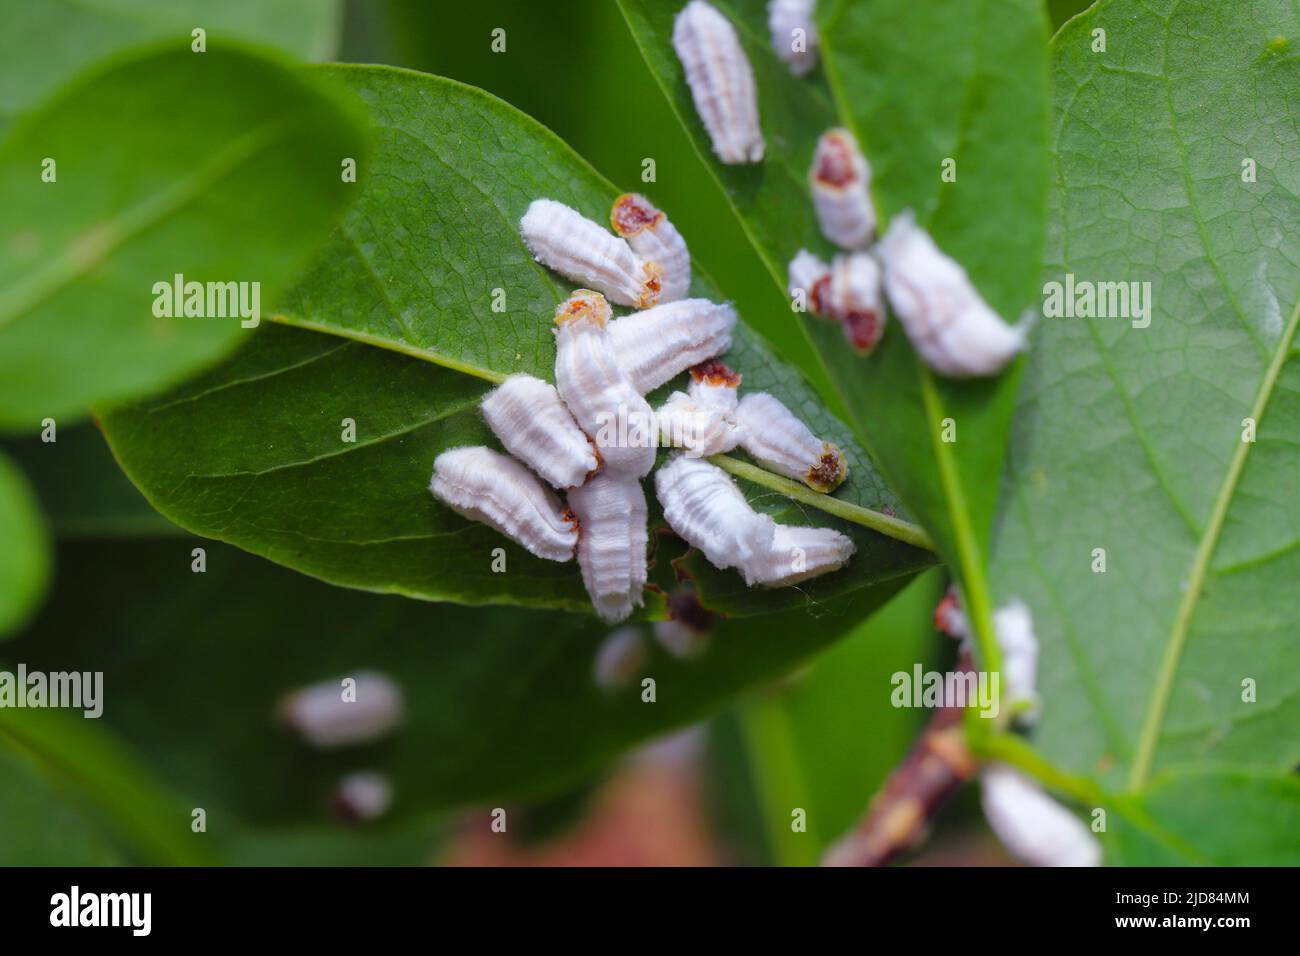 https://c8.alamy.com/comp/2JD84MM/scale-insects-coccidae-on-a-magnolia-in-the-garden-dangerous-pests-of-various-plants-they-are-commonly-known-as-soft-scales-wax-scales-or-tortois-2JD84MM.jpg